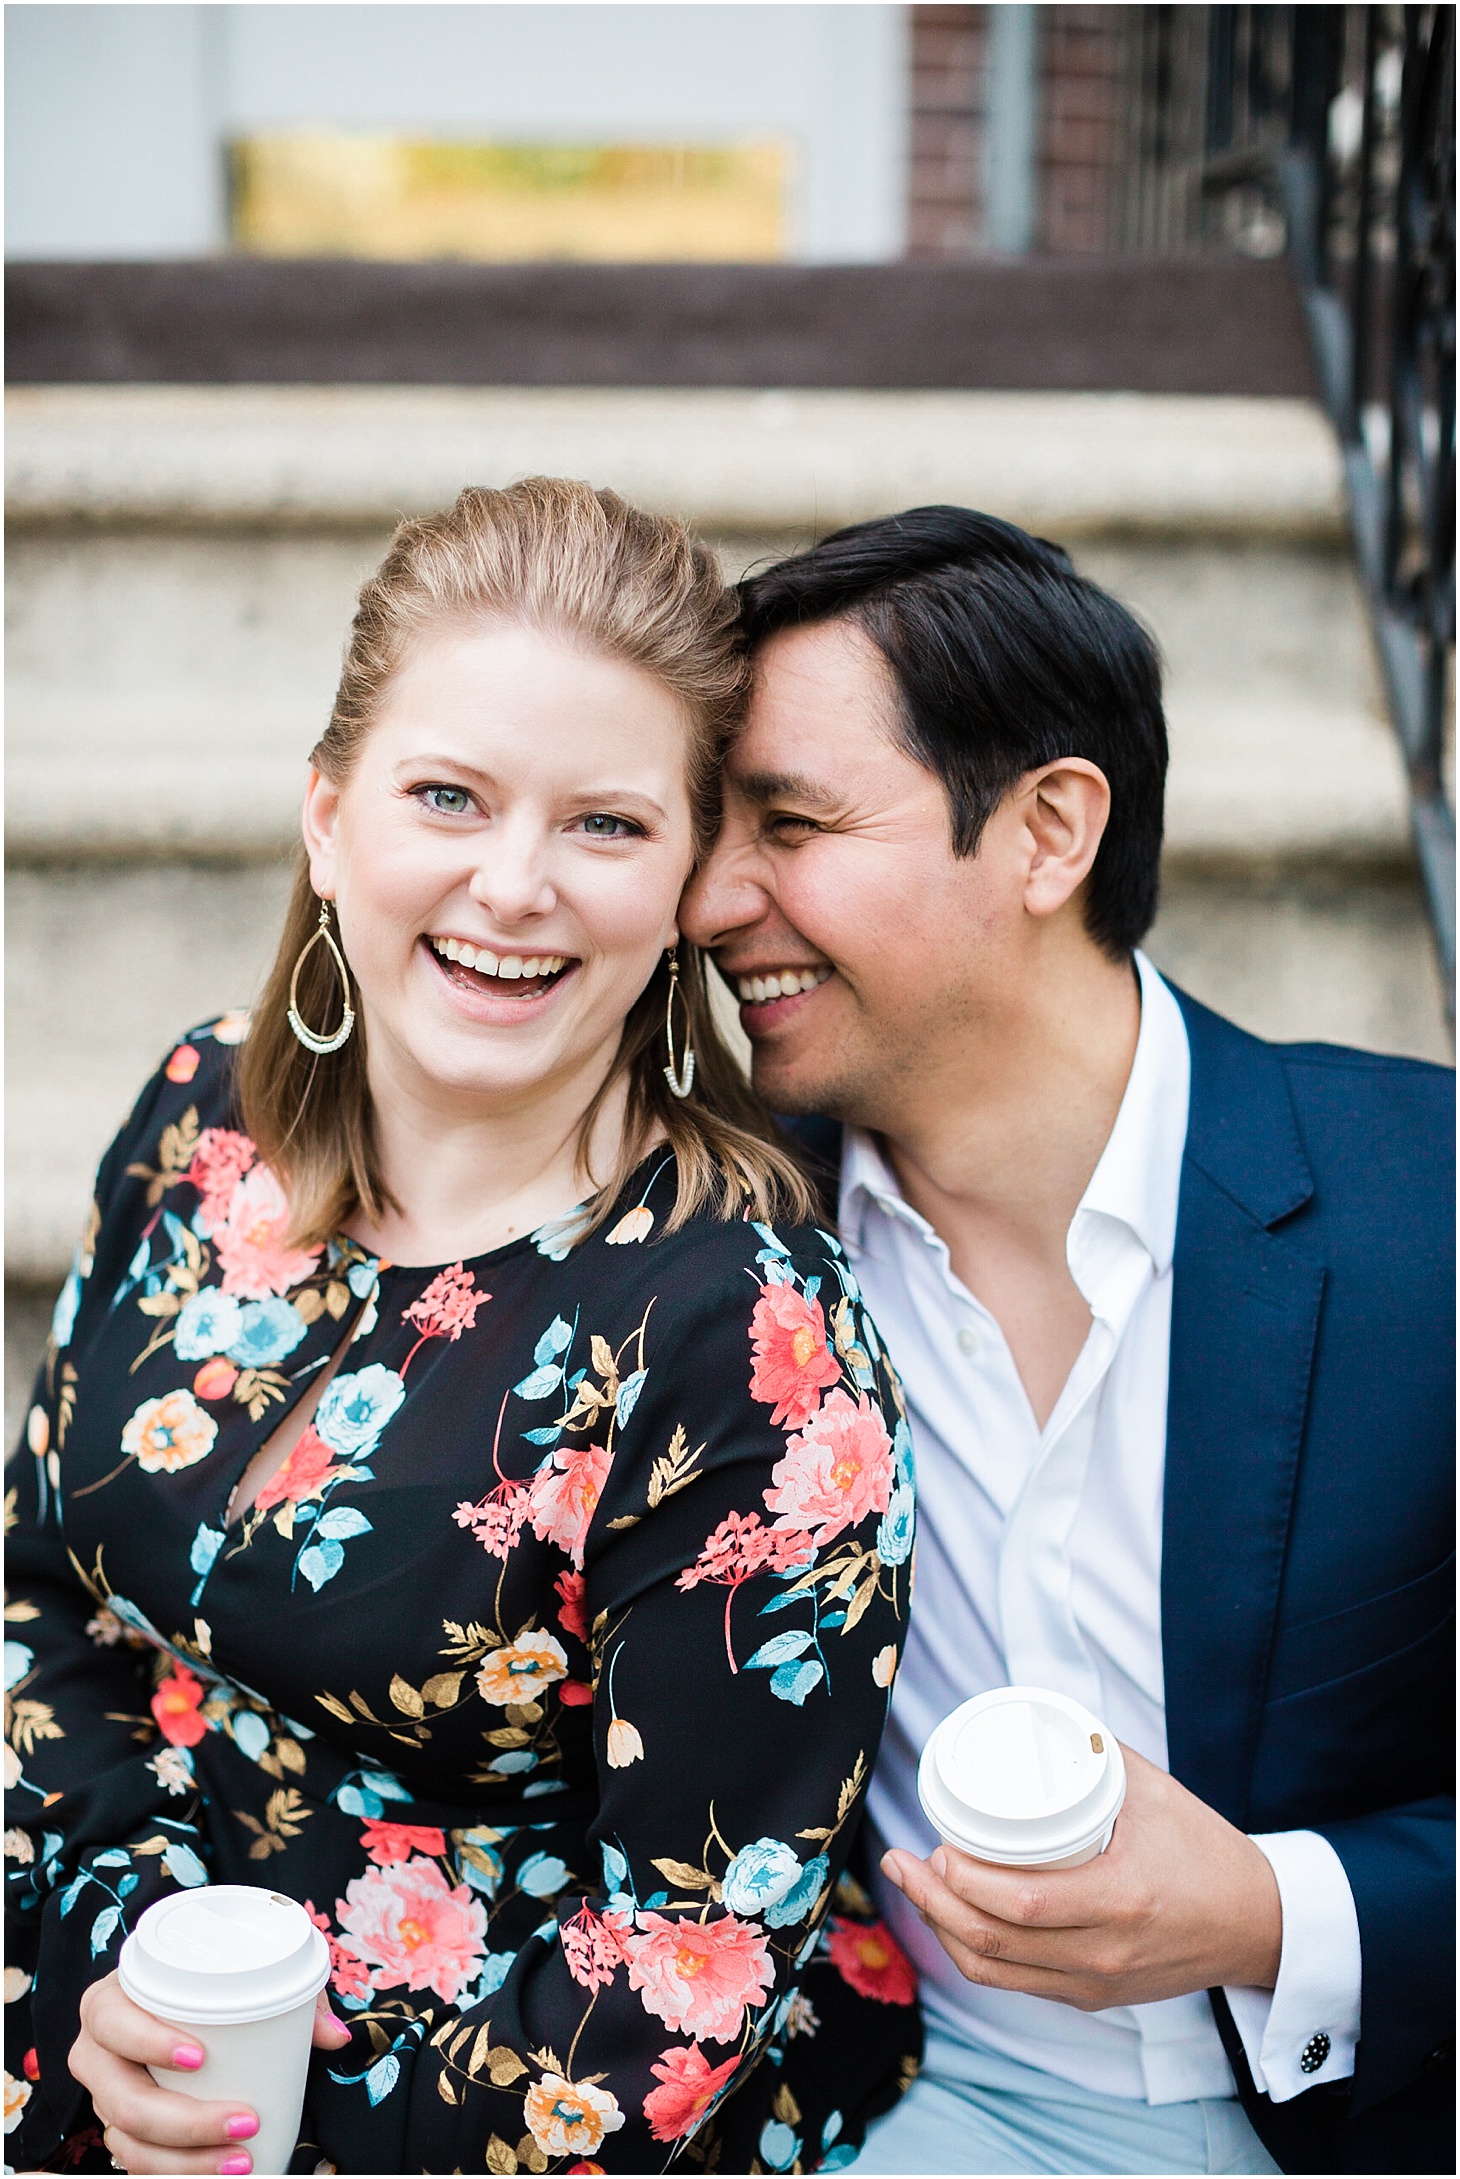 Engagement Portraits on Brownstone in NYC, Springtime Engagement in Queens NYC, Sarah Bradshaw Photography